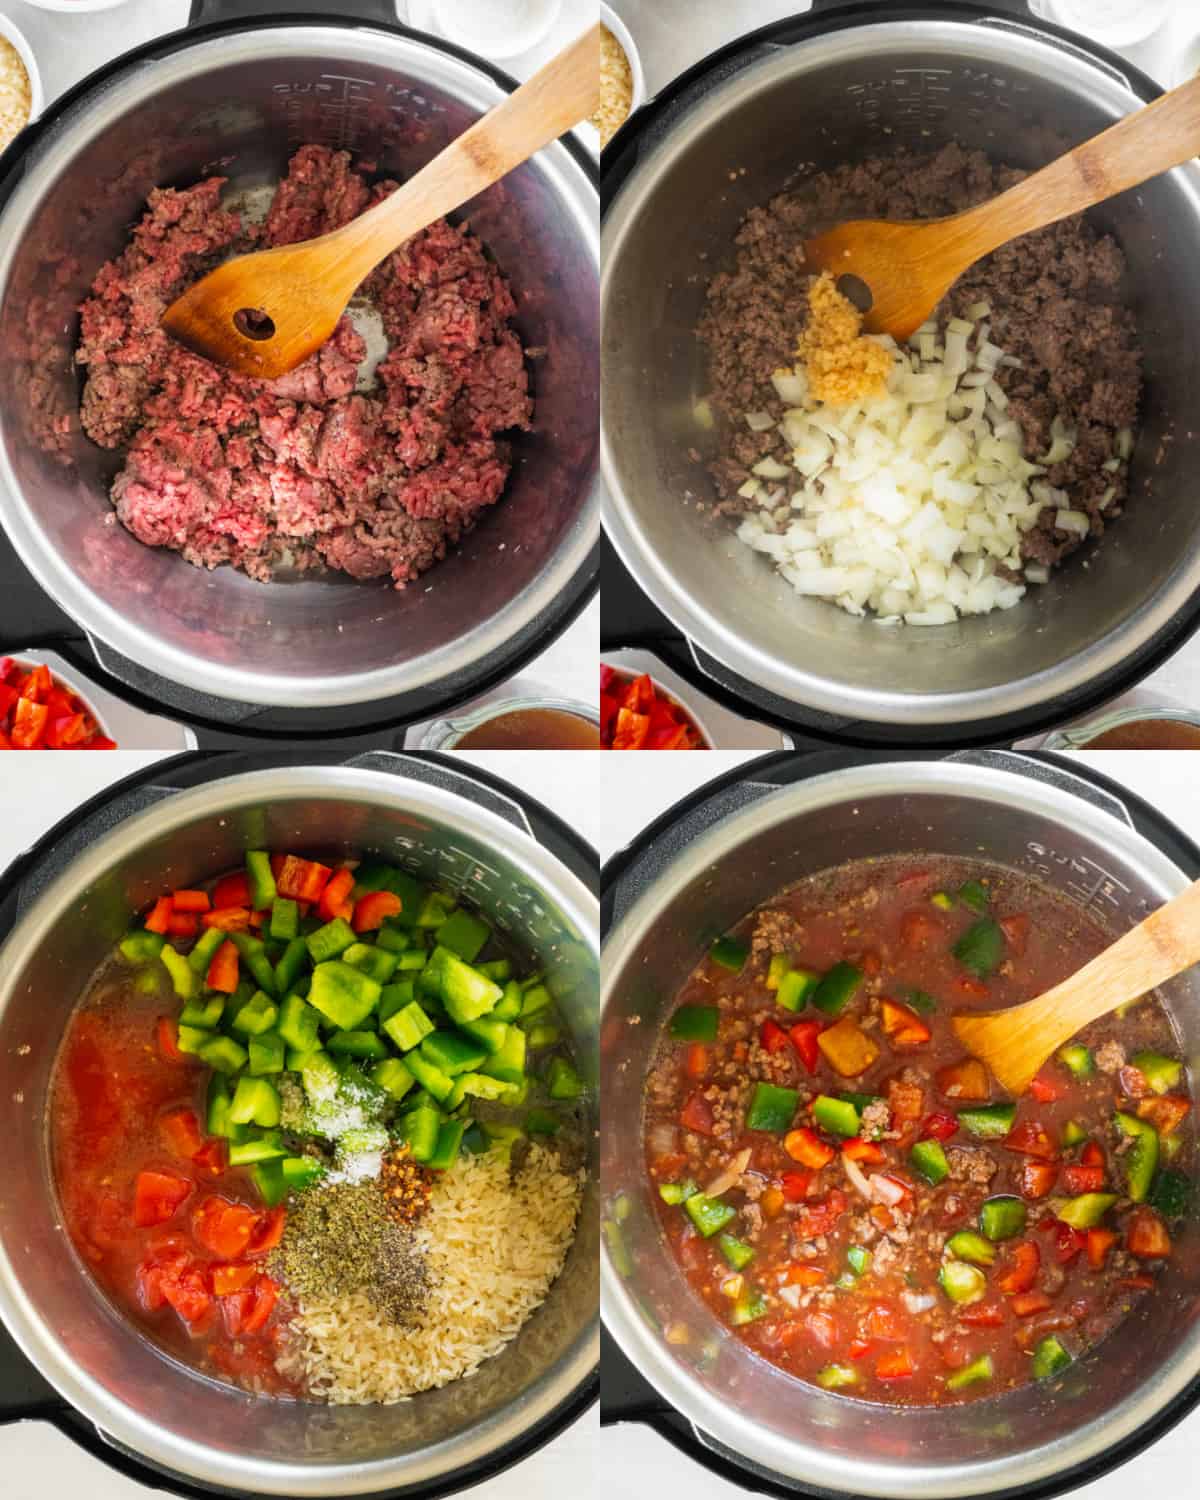 Cooking the ground beef and onions on saute mode in the Instant pot before adding the remaining ingredients and pressure cooking.